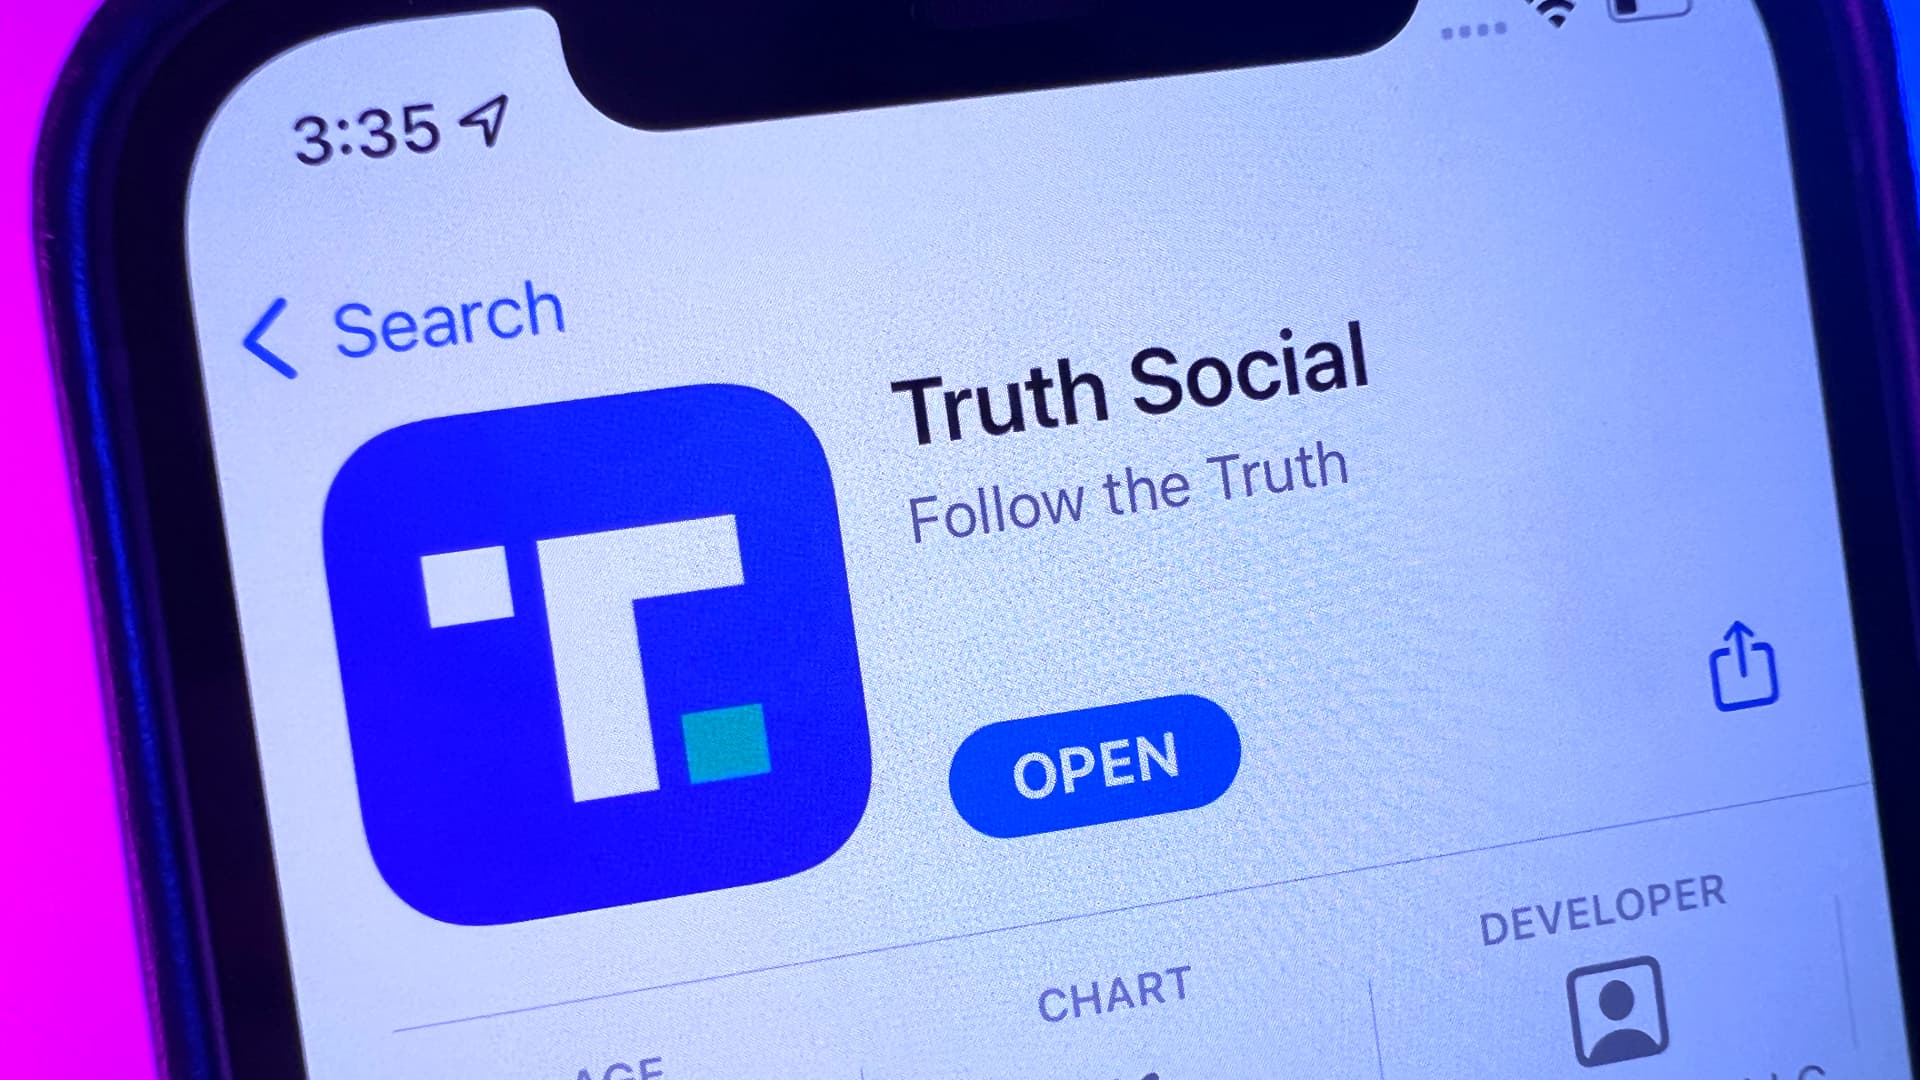 Digital World Acquisition Corp shares jump after Google Play Store approves Trump's Truth Social